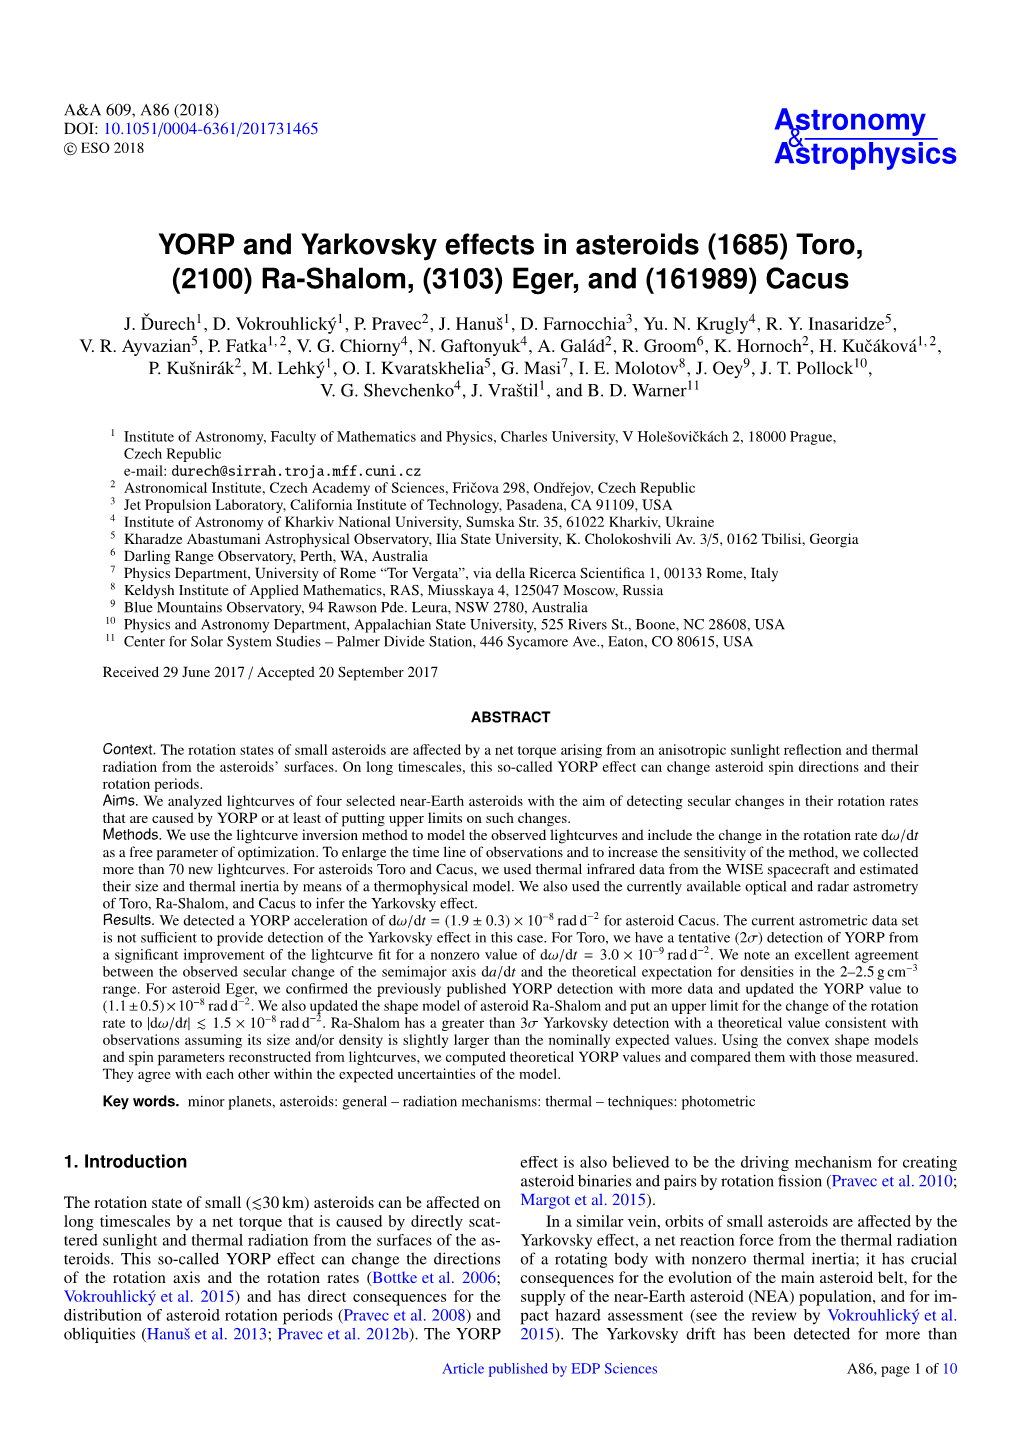 YORP and Yarkovsky Effects in Asteroids (1685) Toro, (2100) Ra-Shalom, (3103) Eger, and (161989) Cacus